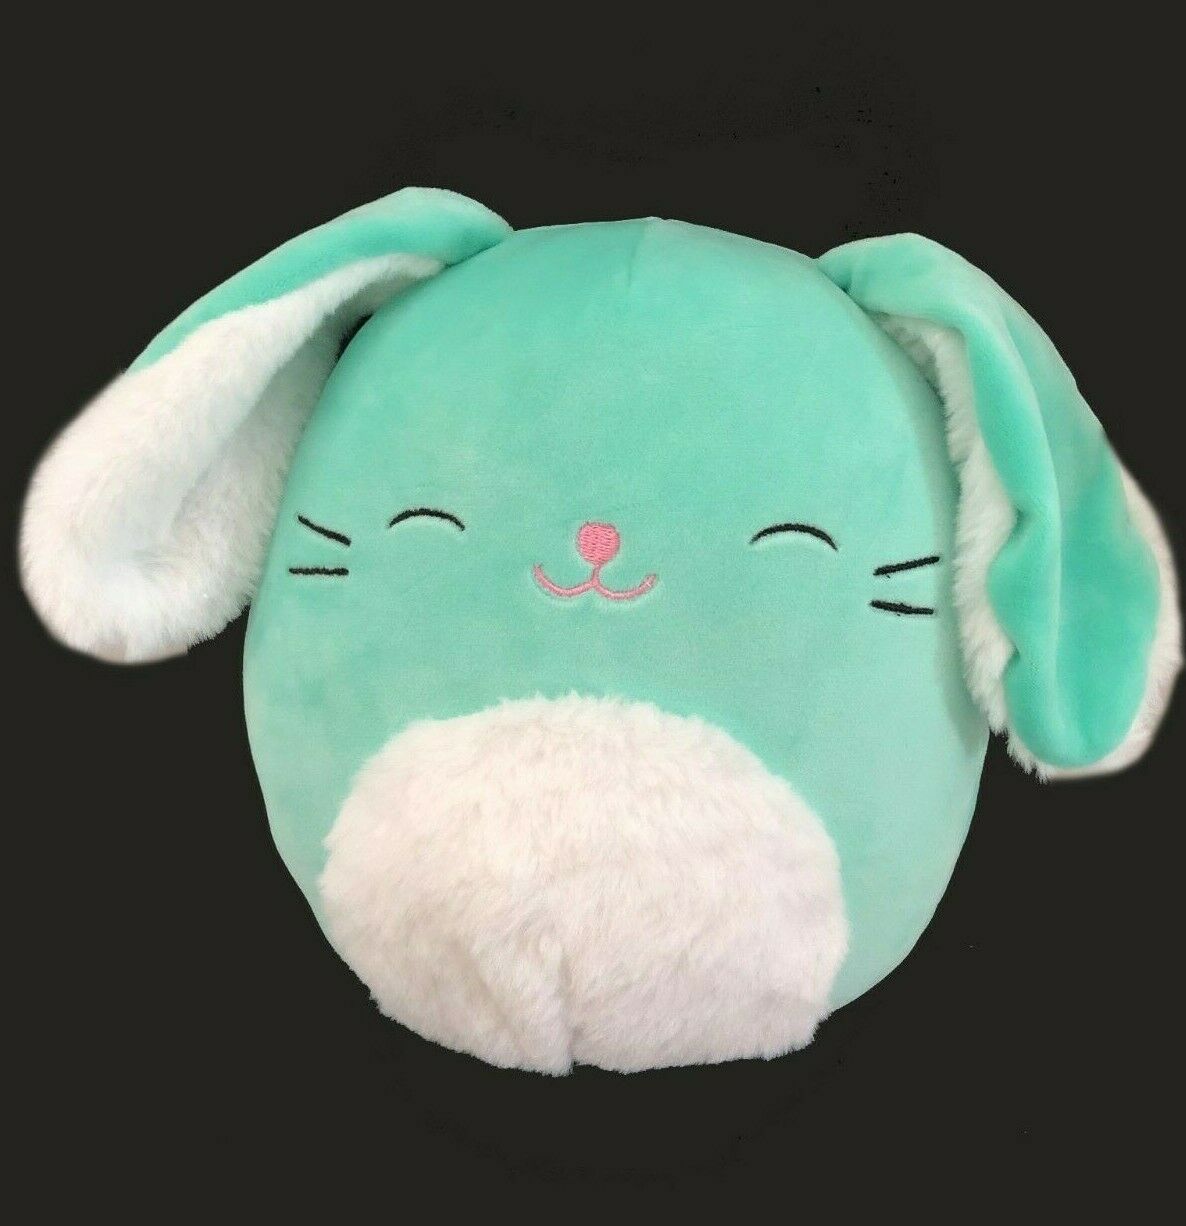 Details about   NWT Squishmallow 5” Sammy The Teal Bunny Easter edition 2021 plush KellyToy 